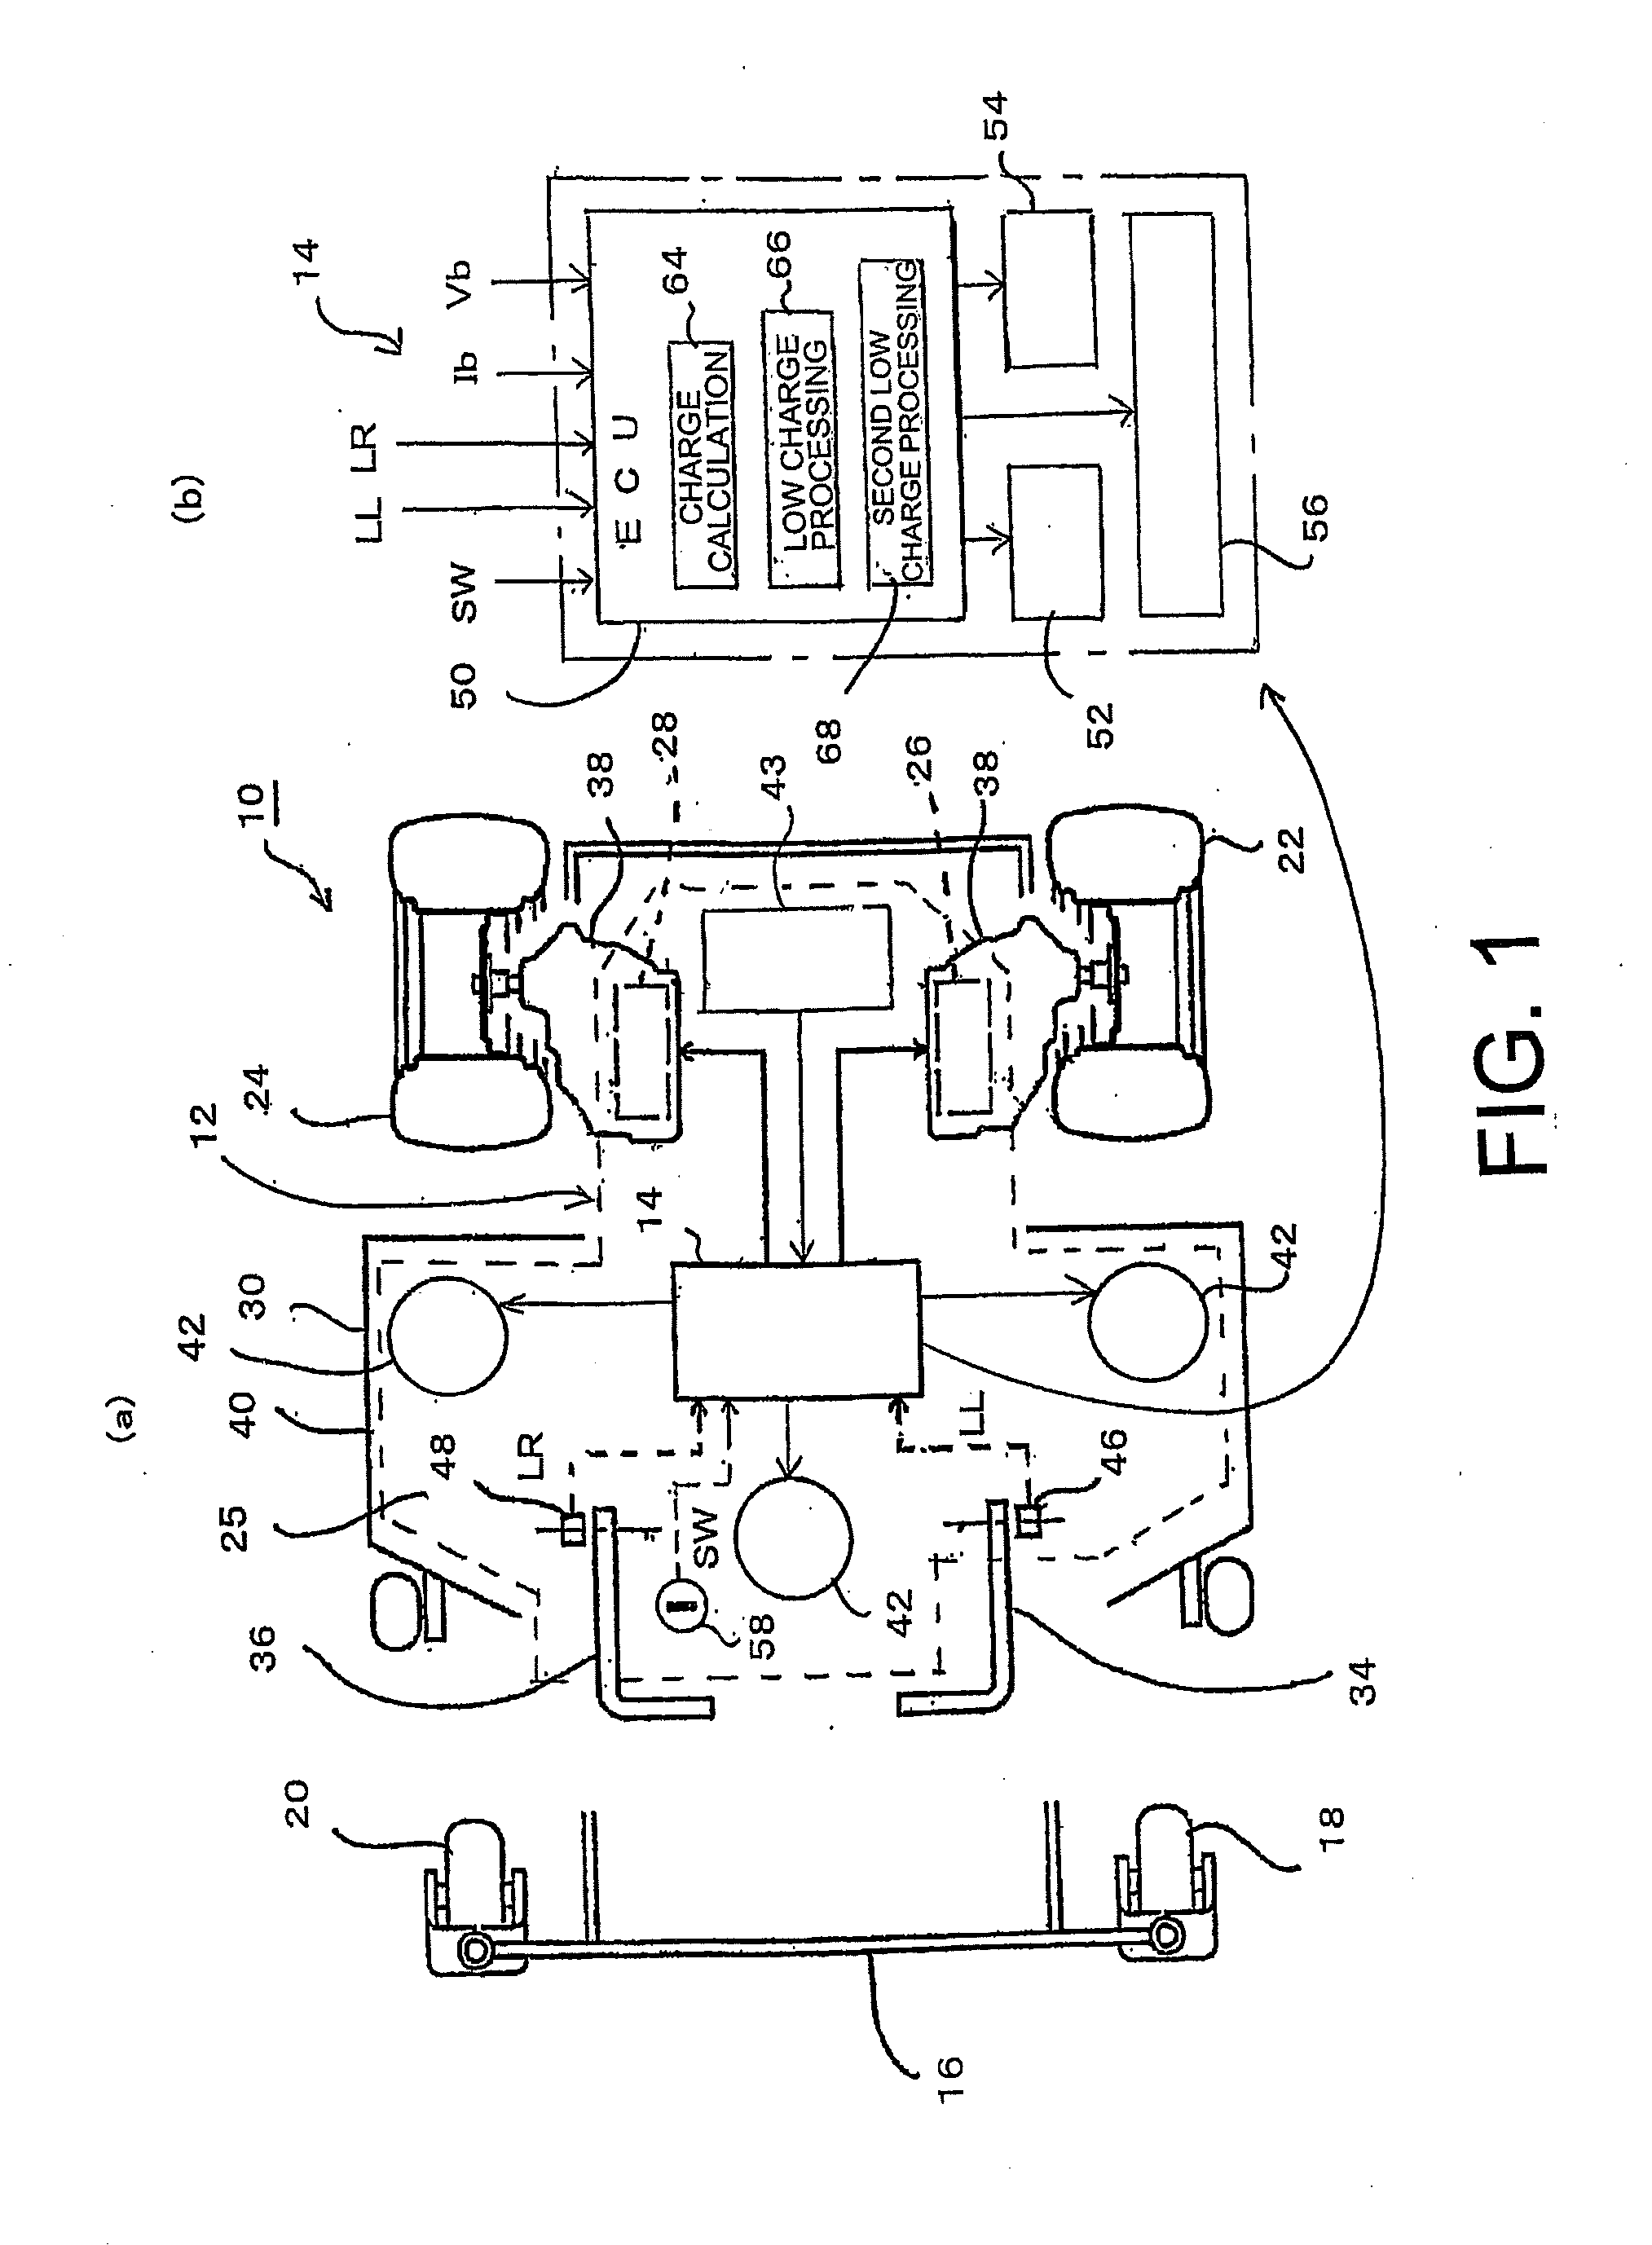 Motor control system and control system for electric motor-driven vehicle